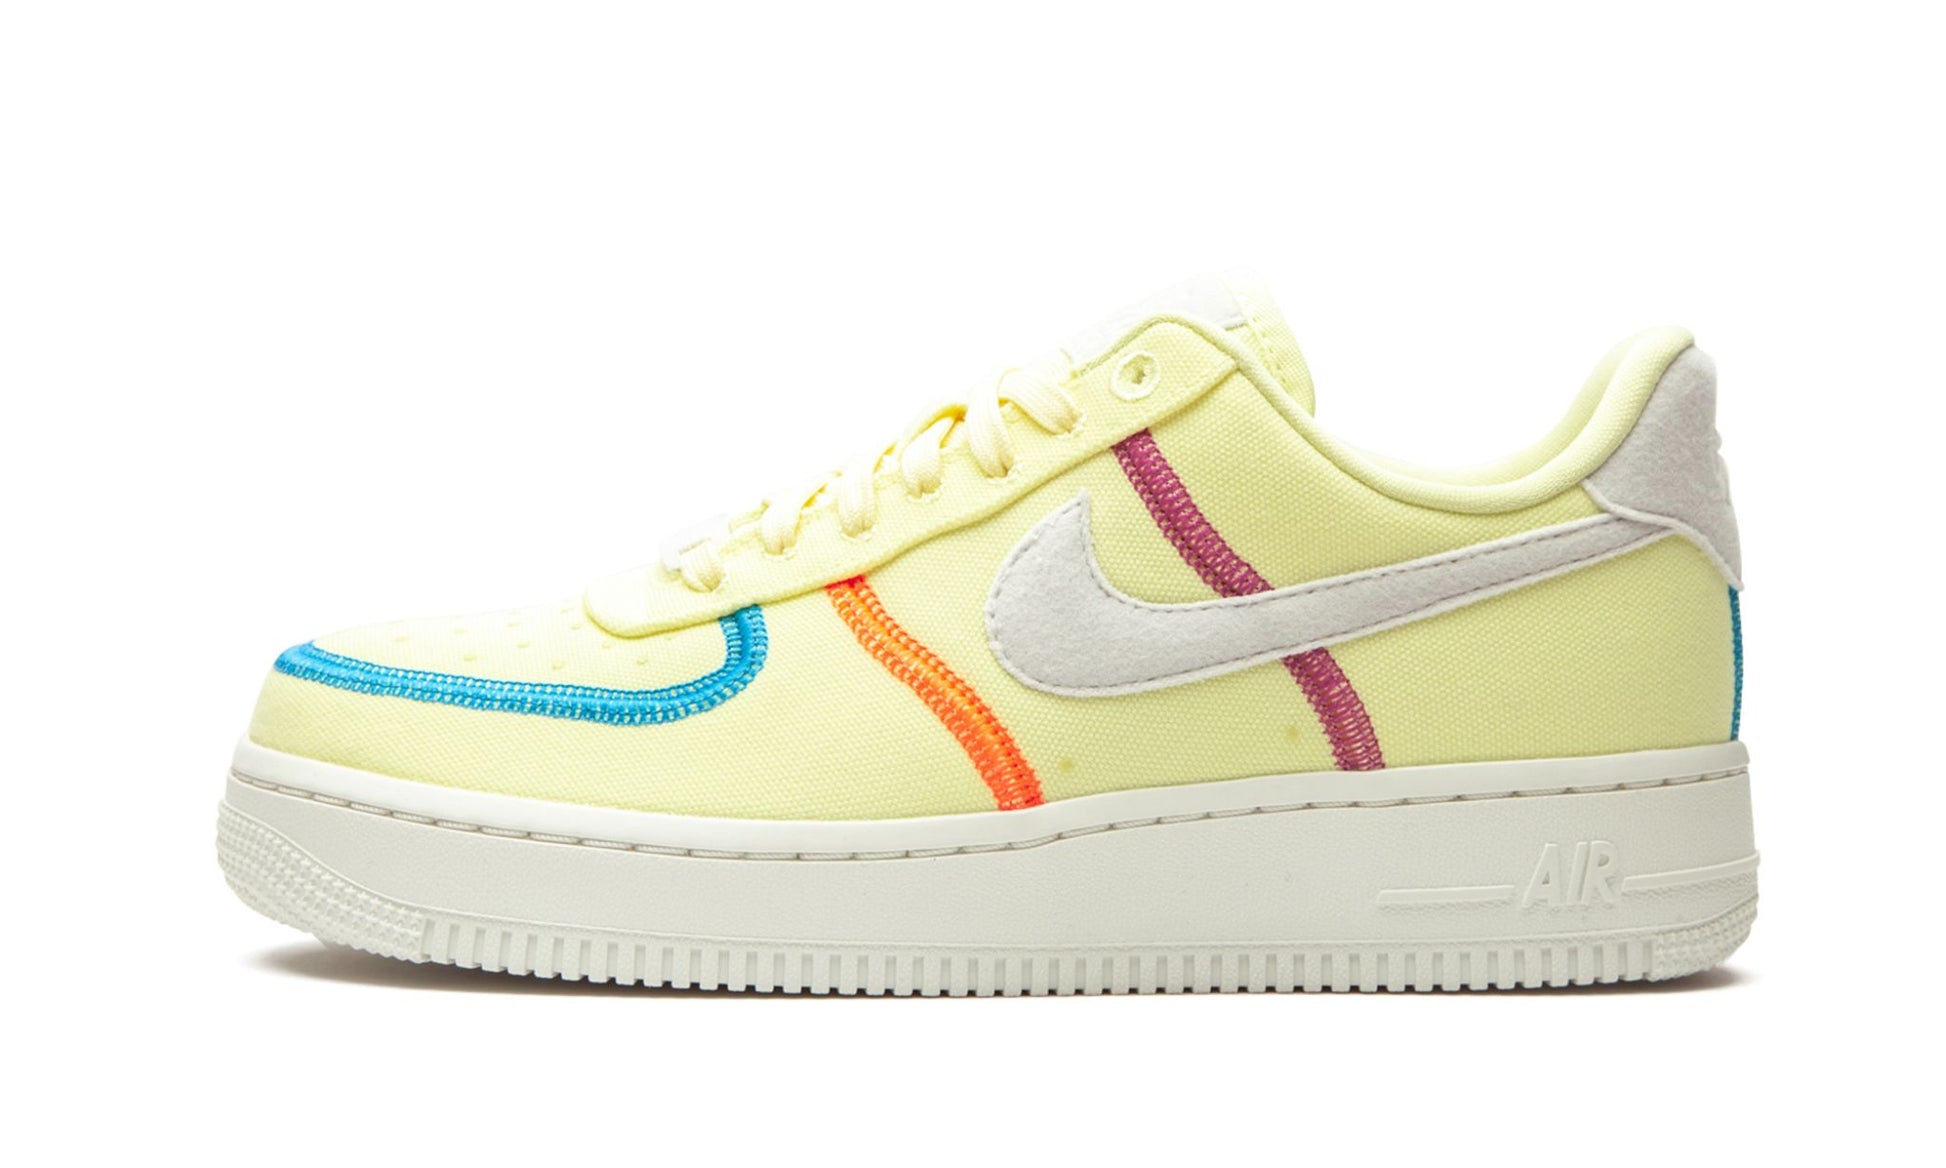 WMNS Air Force 1 '07 LX "Life Lime"